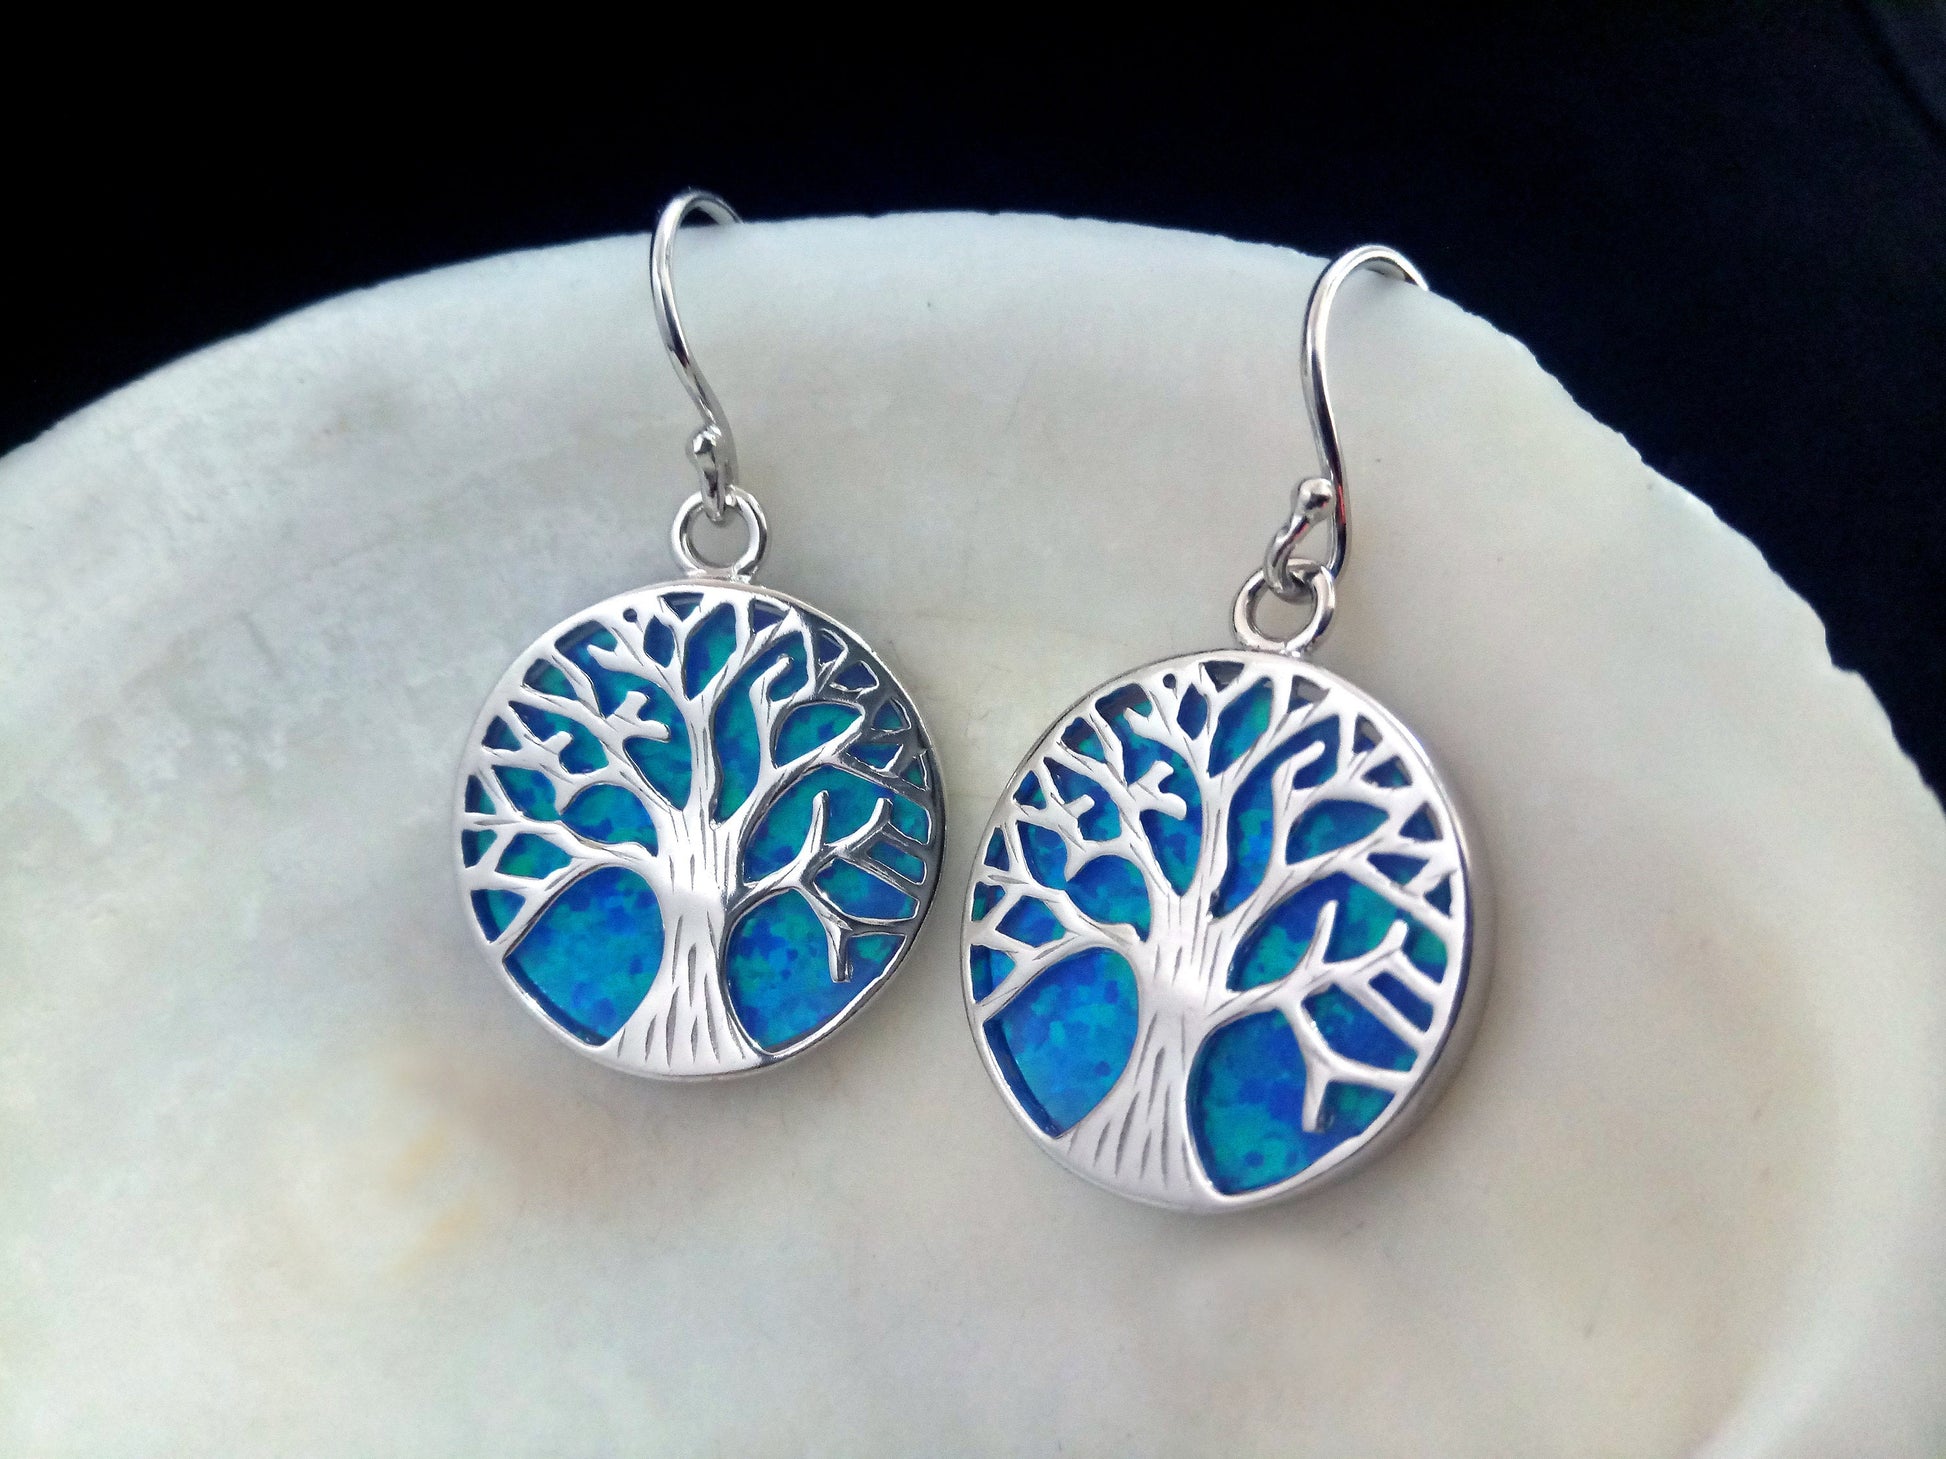 Silver earrings with the Tree Of Life design with blue opal stones on white shell background.